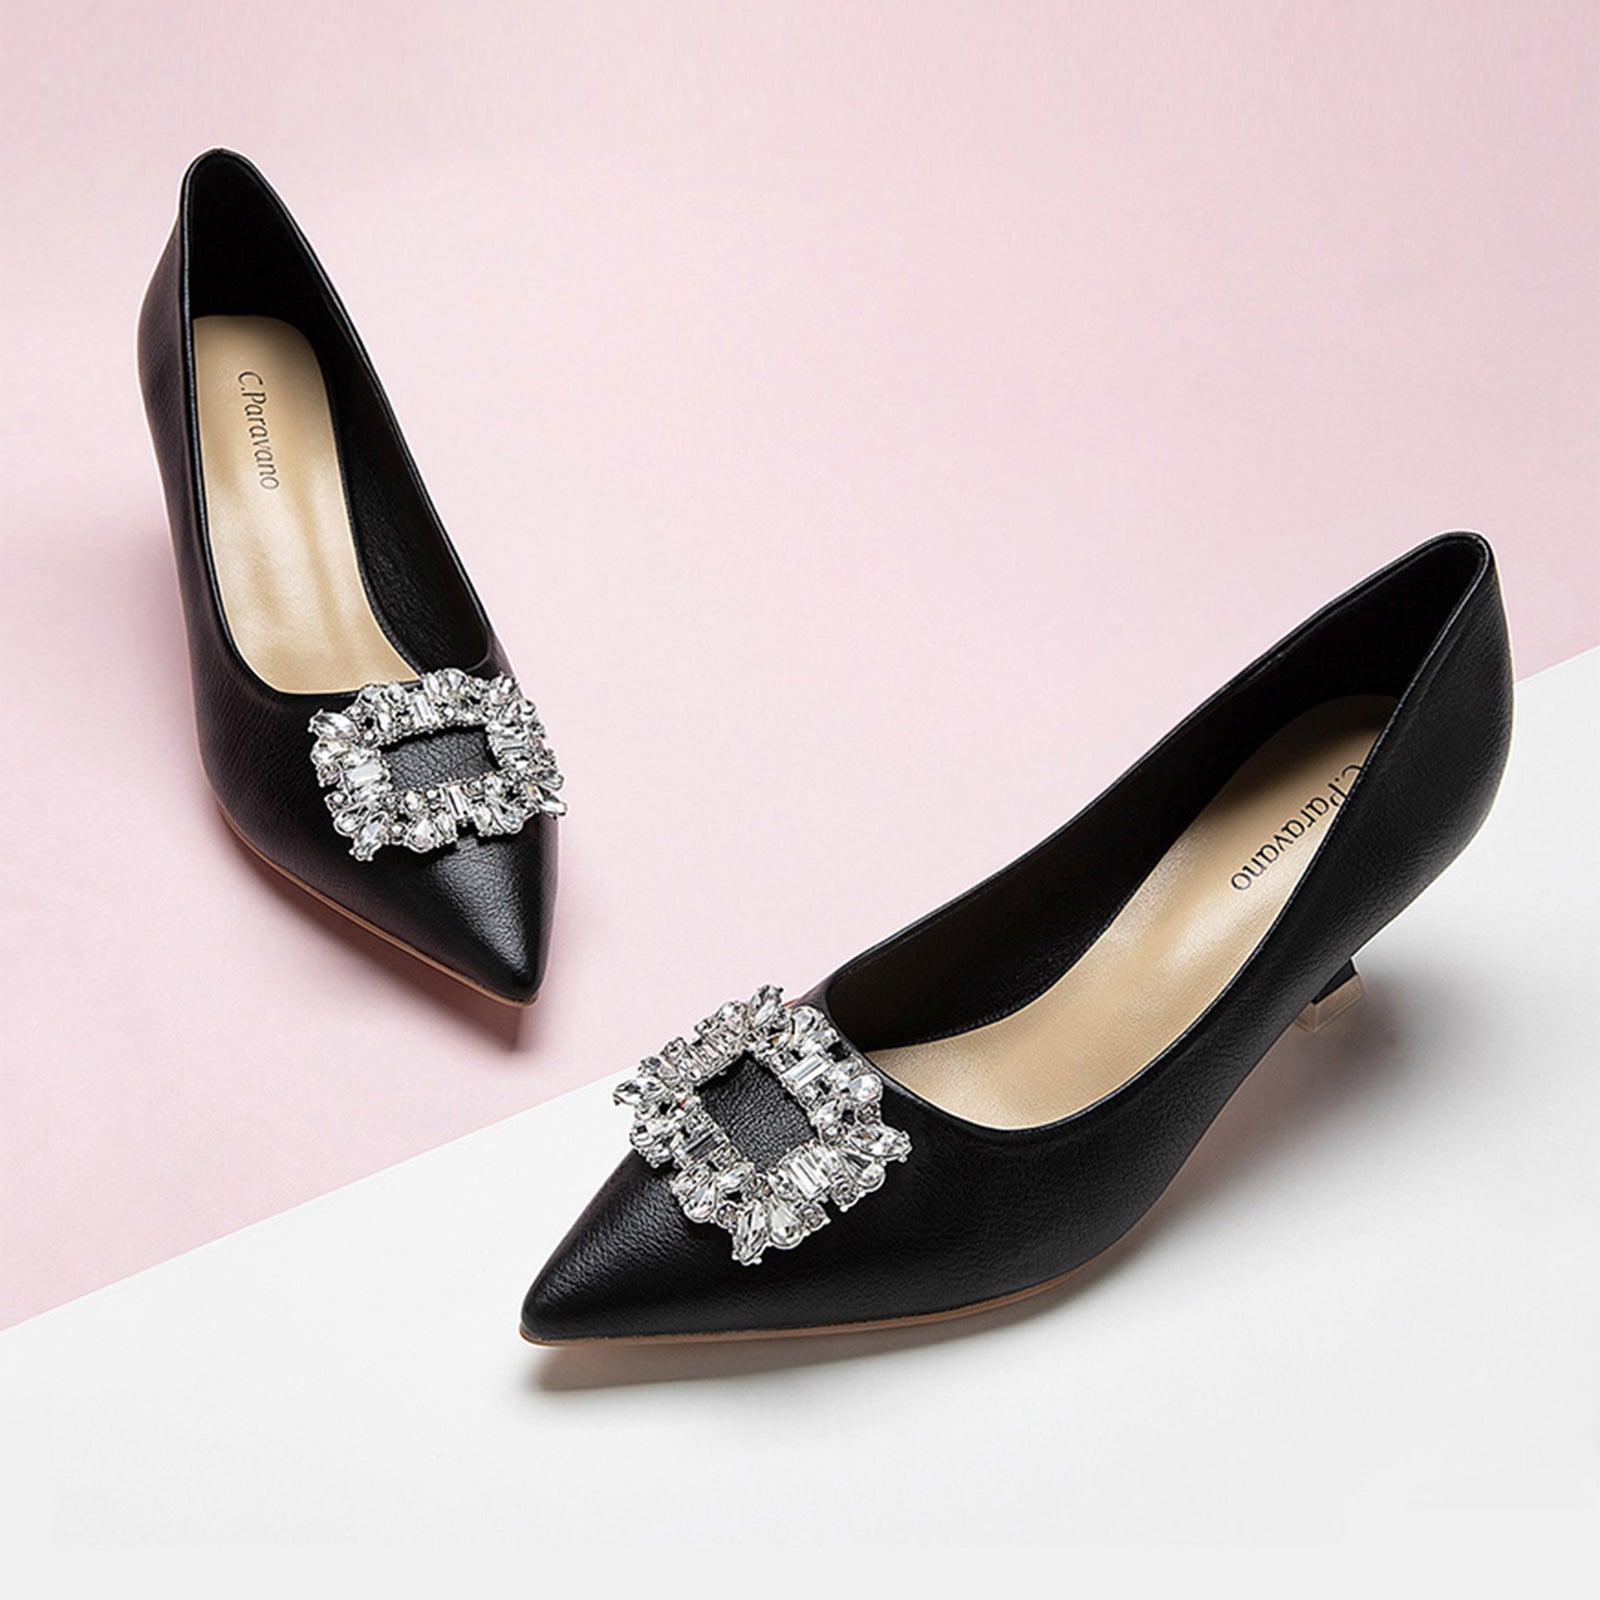 "Urban Elegance: Embellished Black Kitten Heel Pumps with a chic buckle, perfect for adding a touch of glamour to any outfit